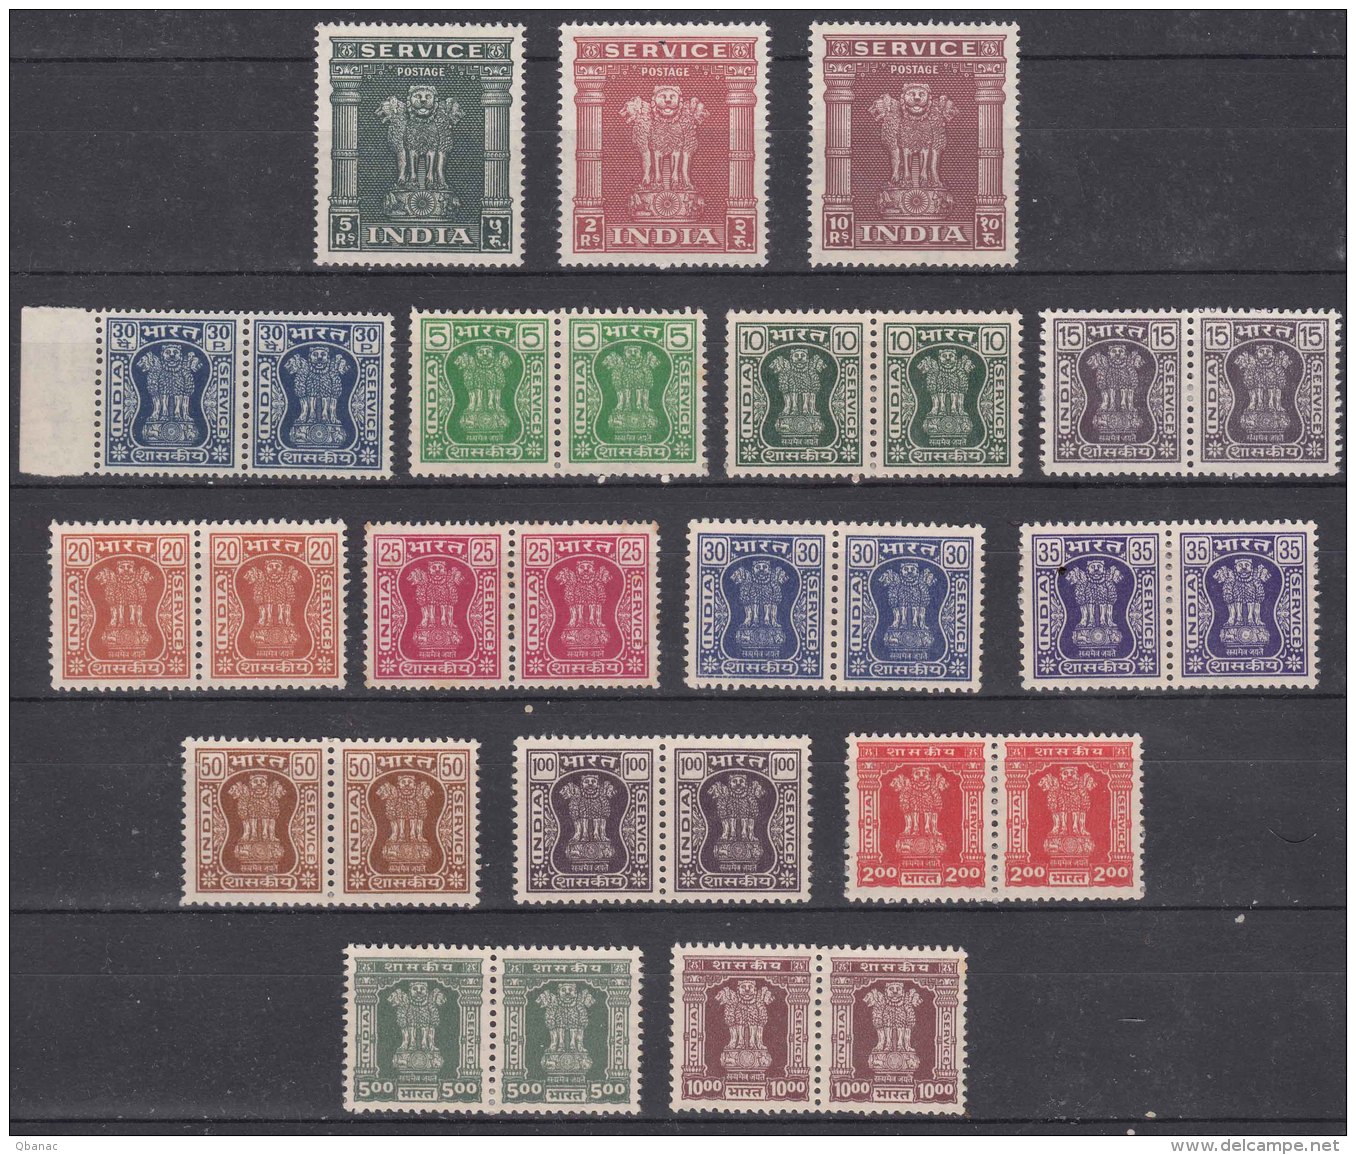 India Porto Postage Due, Dienstmarken Lot, Mixed Mint Never Hinged With Gum Or Without Gum - Dienstmarken